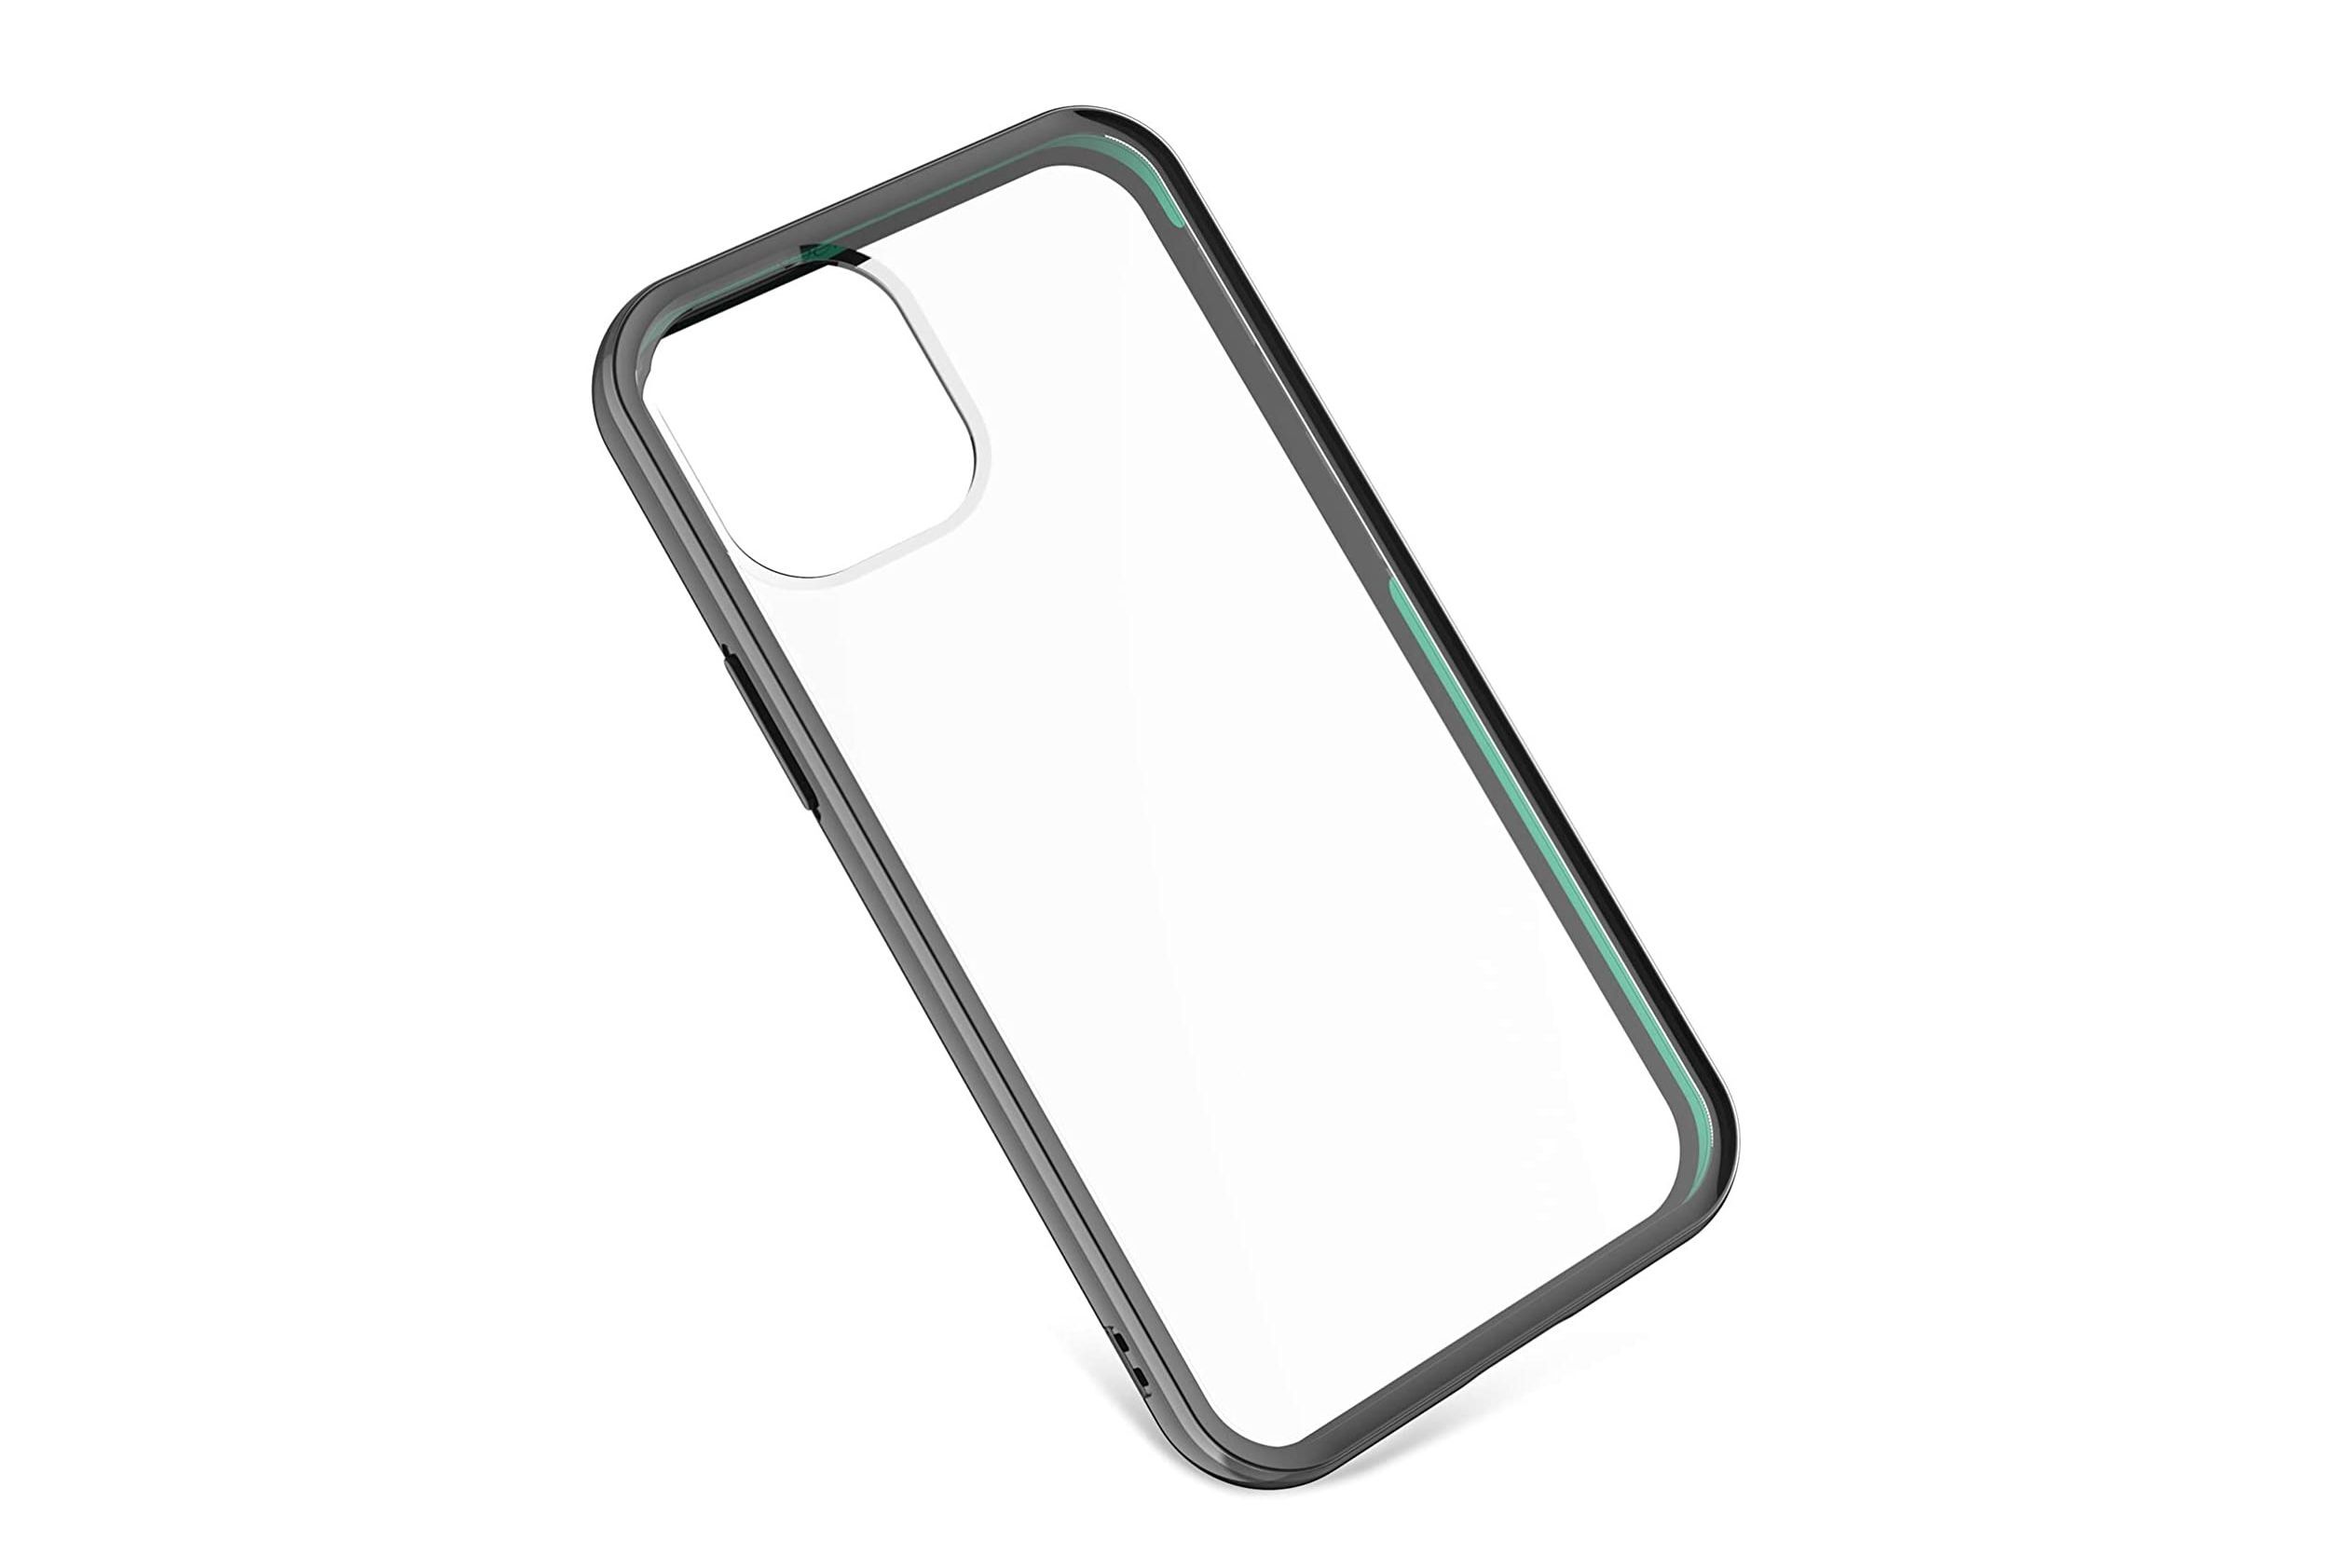 Mous Clarity iPhone 12 mini case - The best iPhone 12 mini cases you can get - updated July 2022